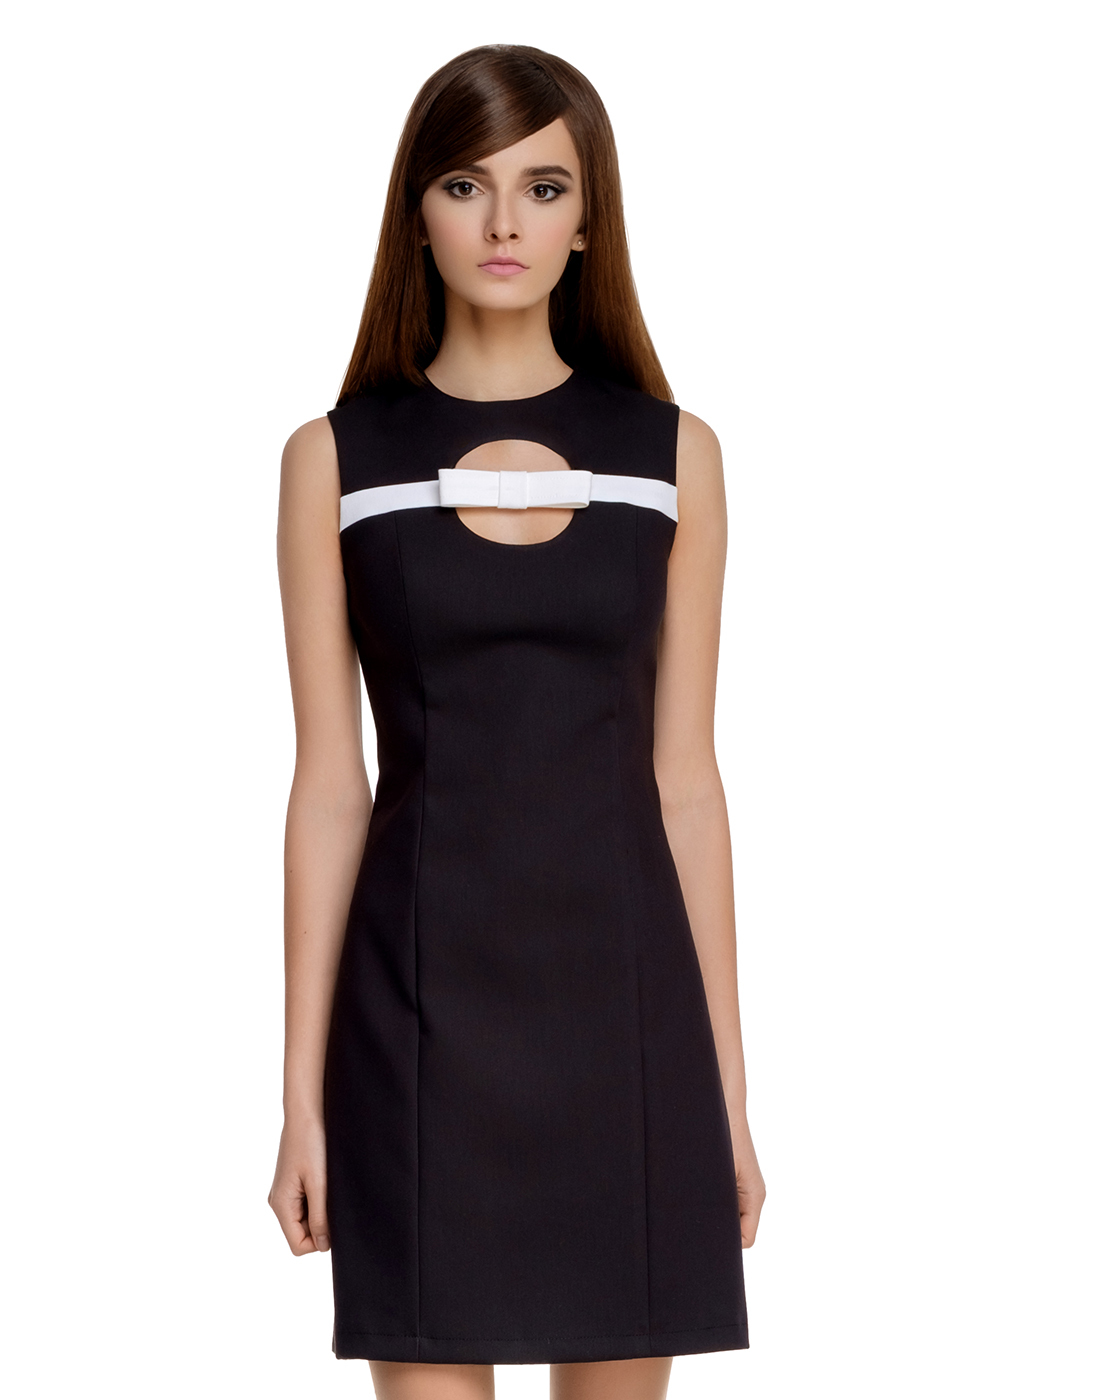 MARMALADE Retro 60s Mod Cut-Out Bow Dress in Black